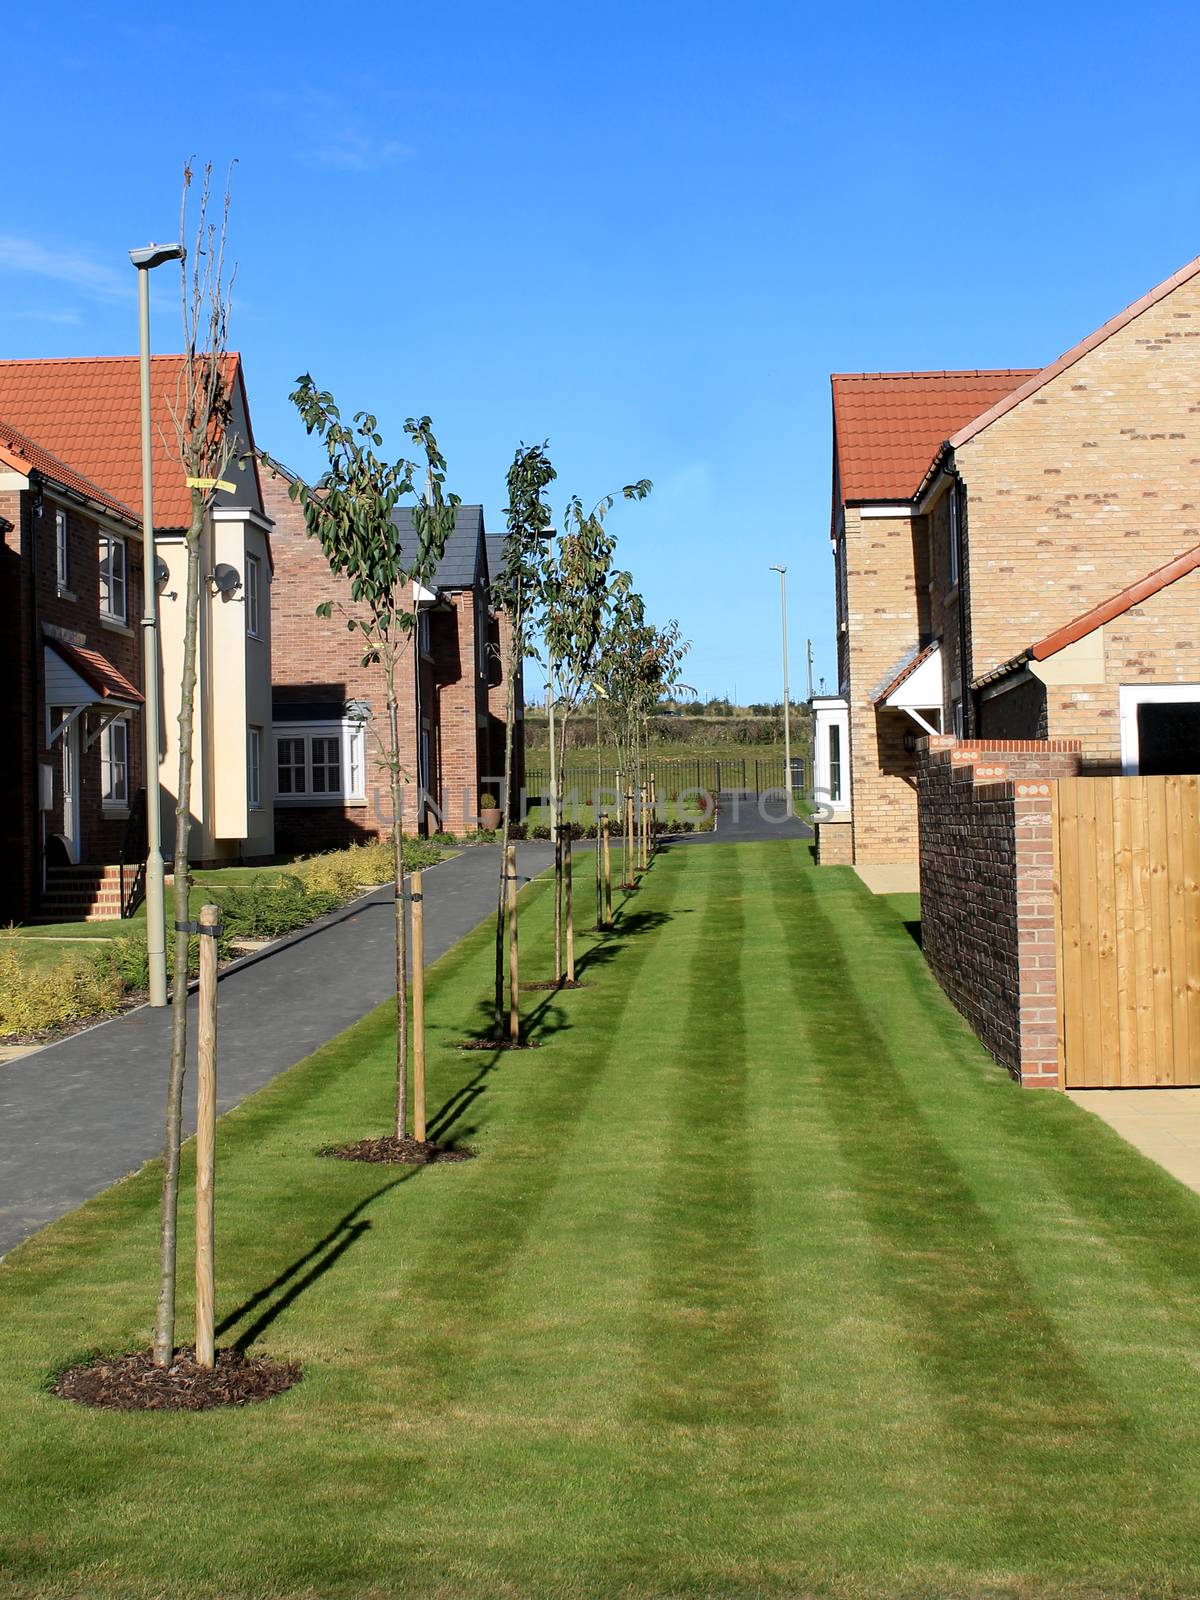 EASTFIELD, SCARBOROUGH, NORTH YORKSHIRE, ENGLAND - 10th of October 2016: New build housing estate pictureed in Scarborough on 10th October 2016. Exterior of new houses.